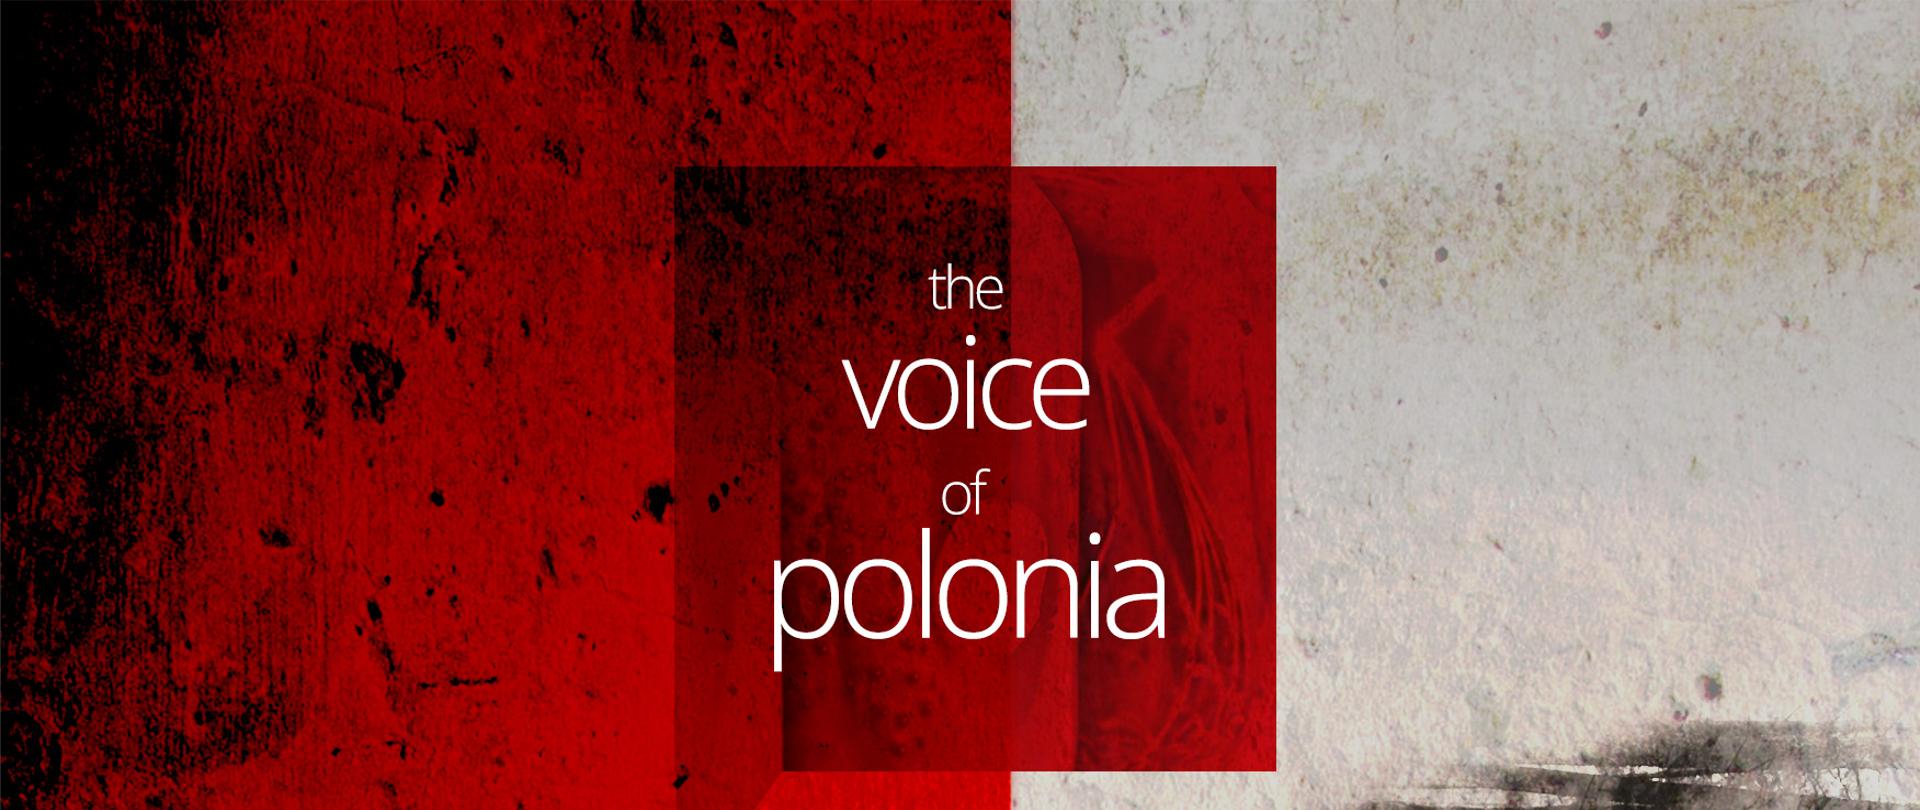 The Voice of Polonia